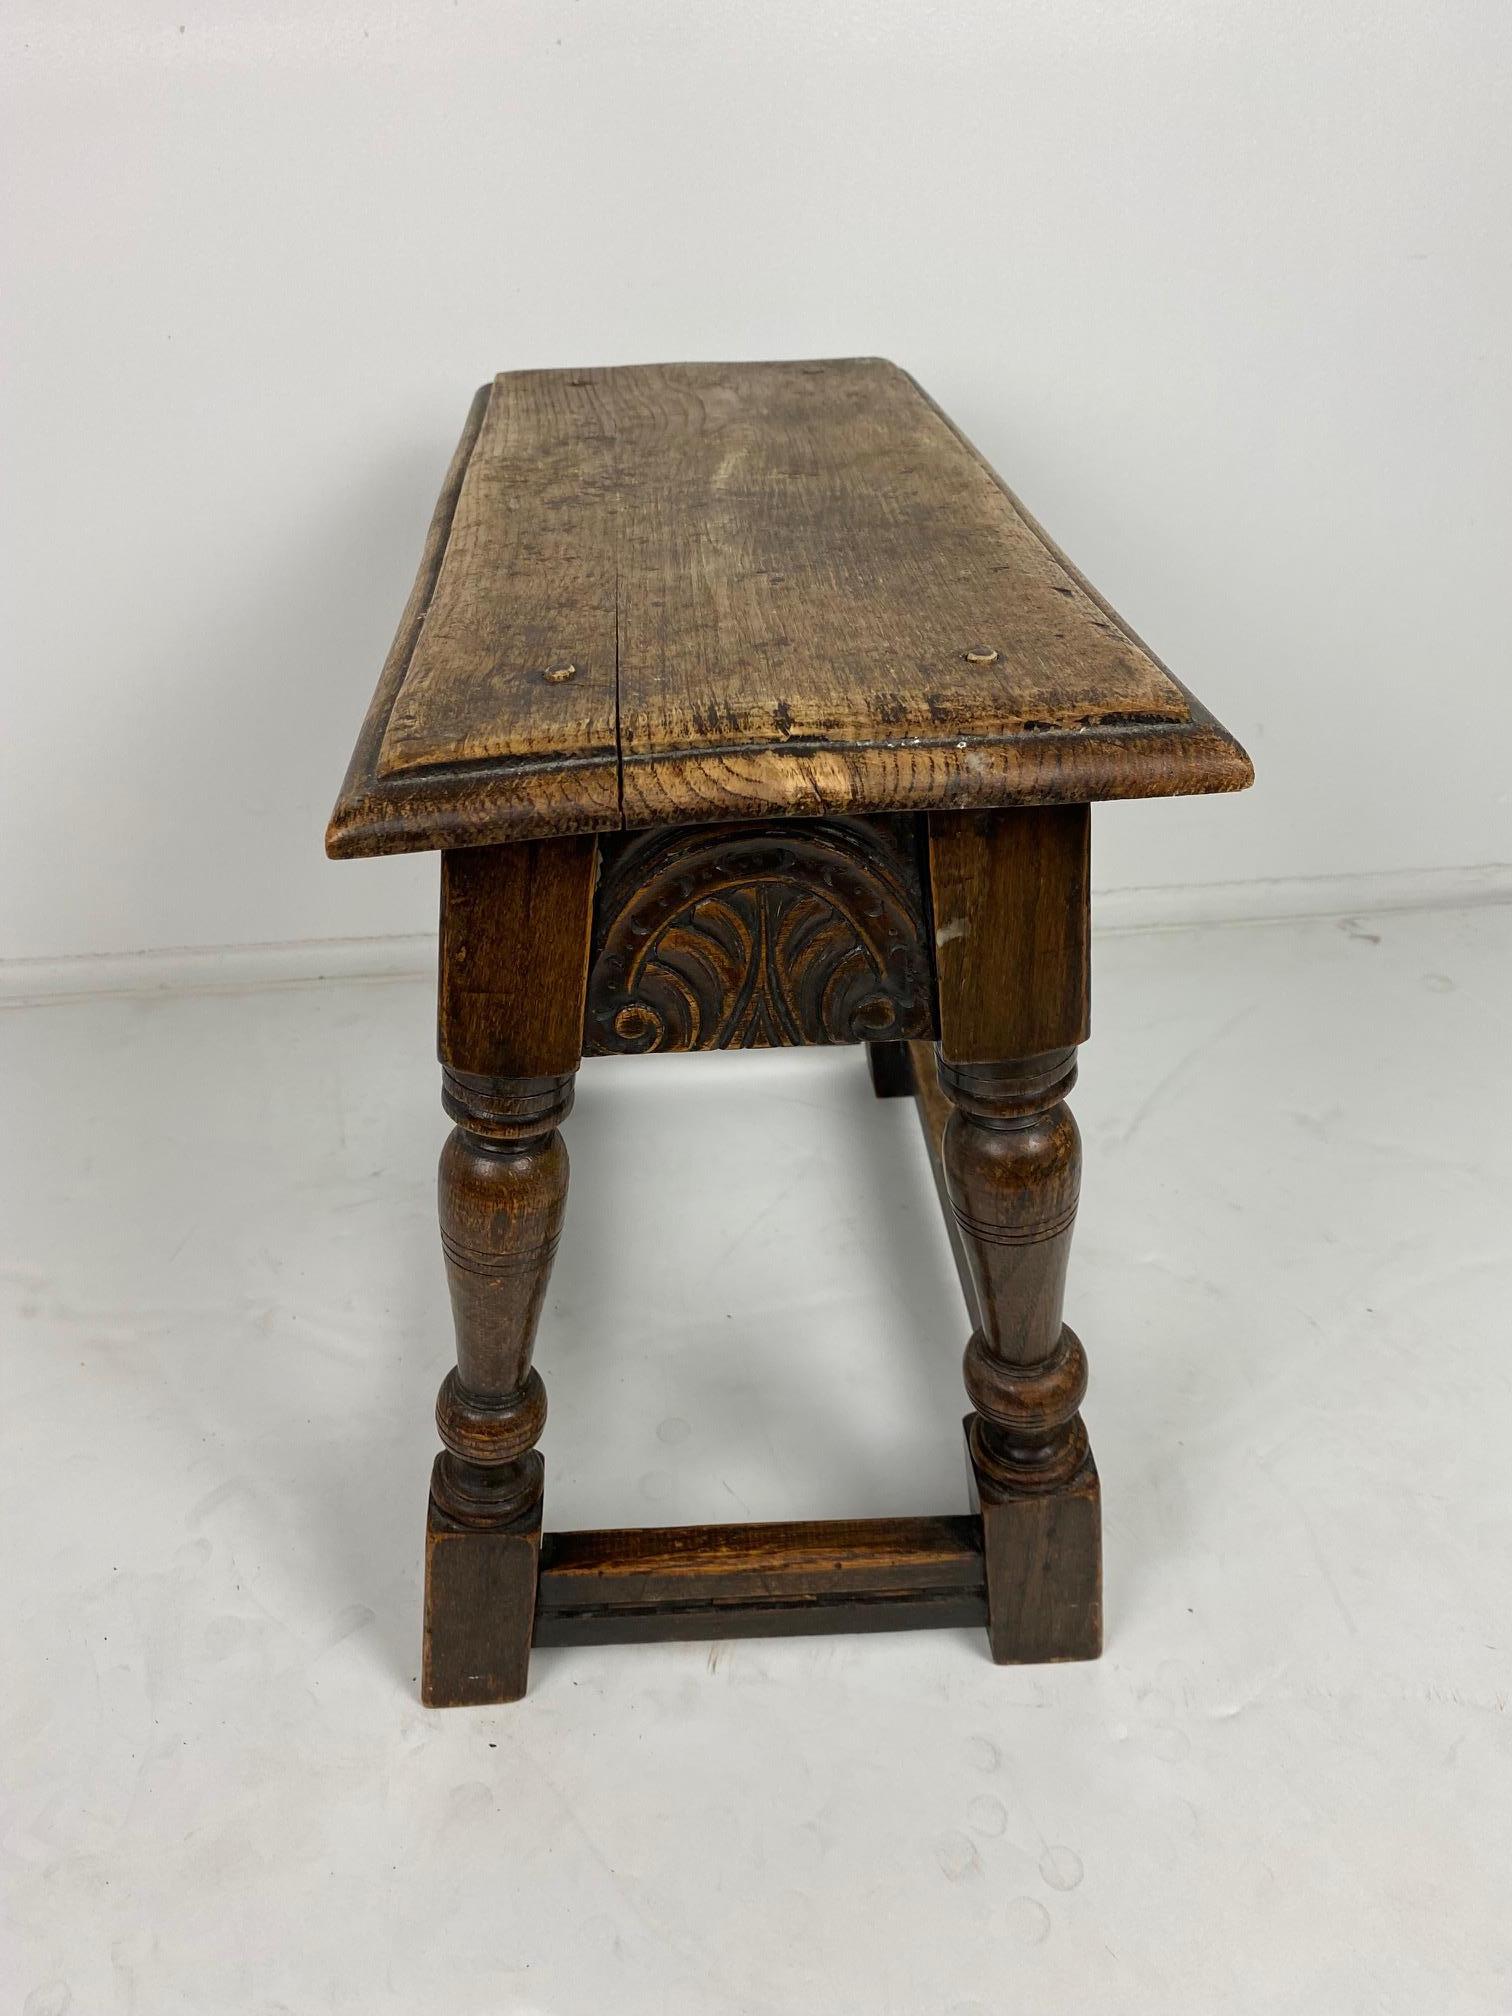 An 1890s English Elizabethan-style joint stool.